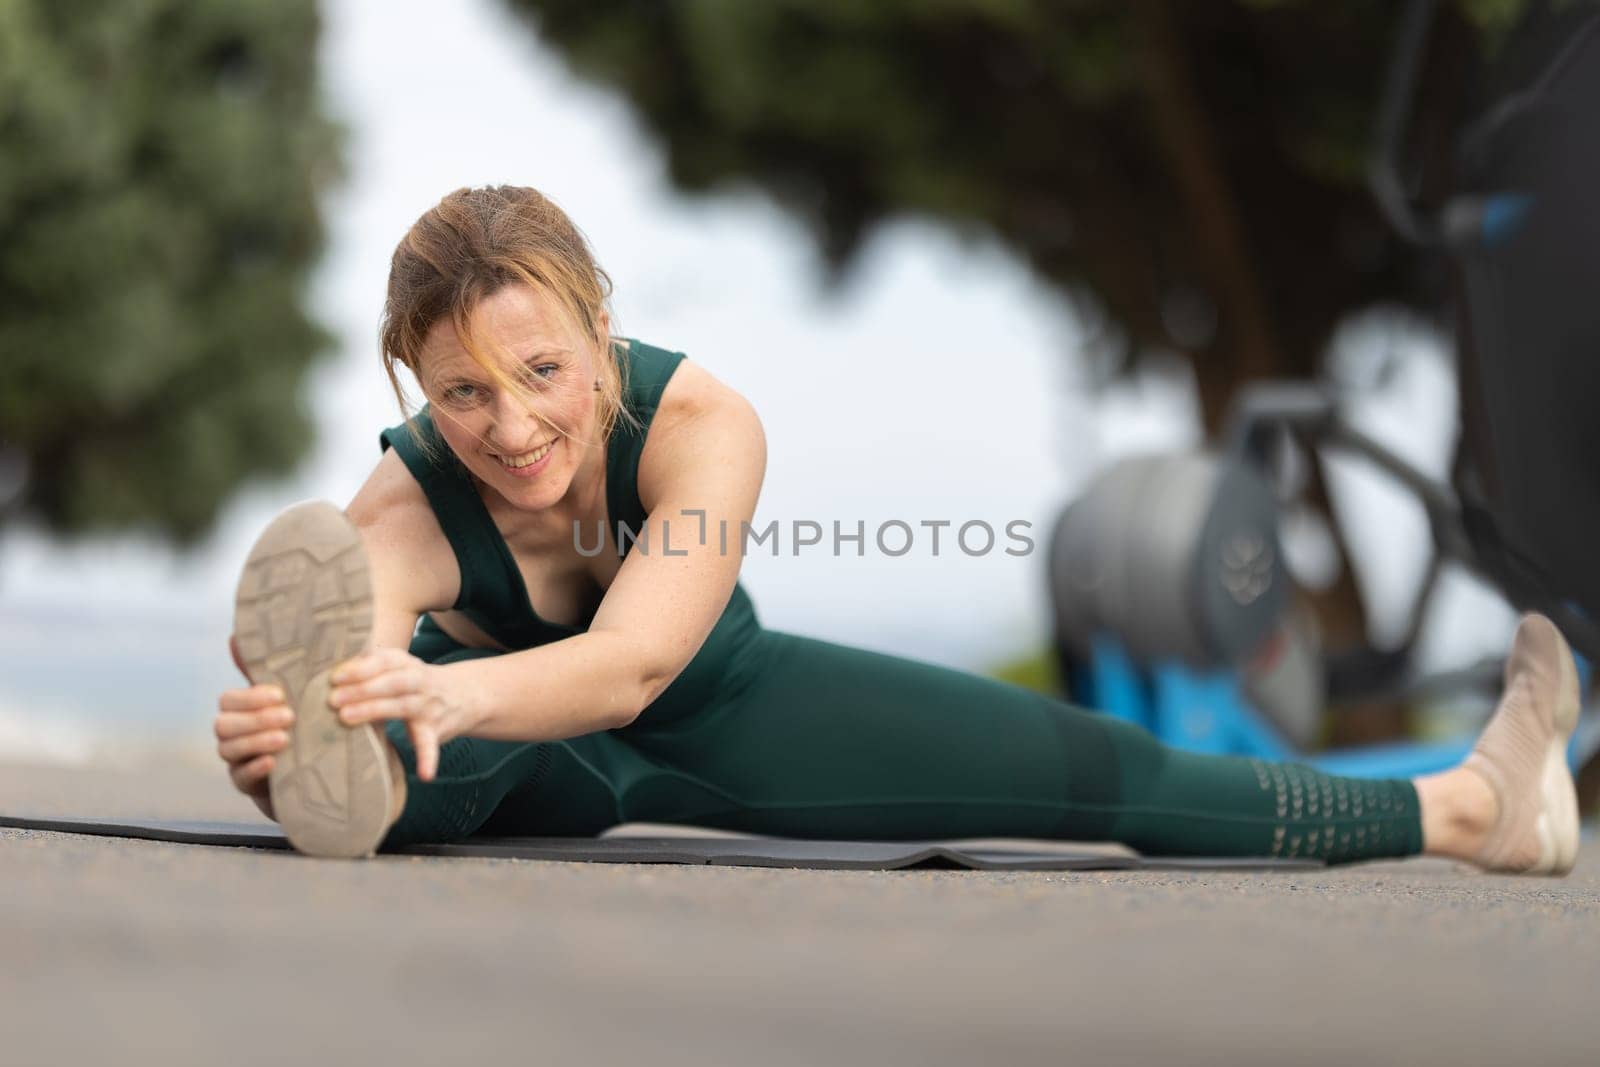 Adult smiling woman sitting in a splits at the outdoor sports ground and stretching down to her leg. Mid shot